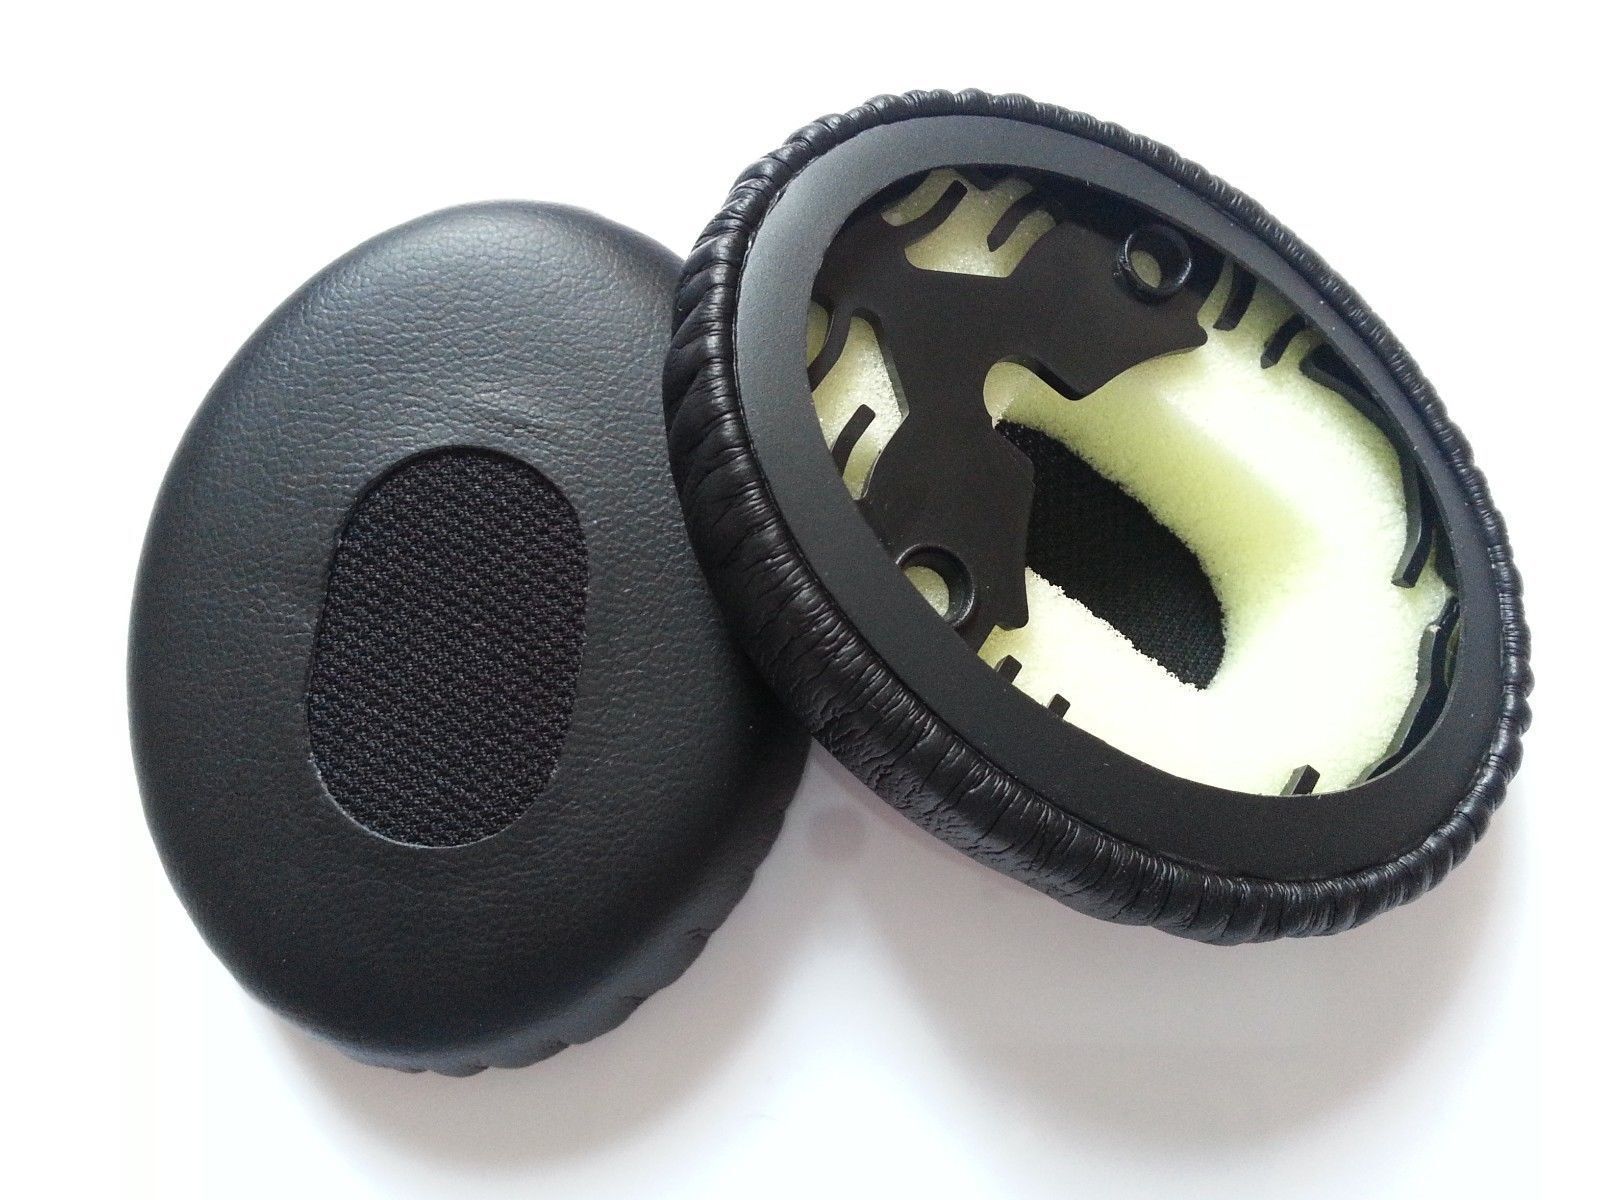 Primary image for New Replacement Ear Pads Cushion For Bose Quietcomfort Qc3 On Ear Oe1 Headphones